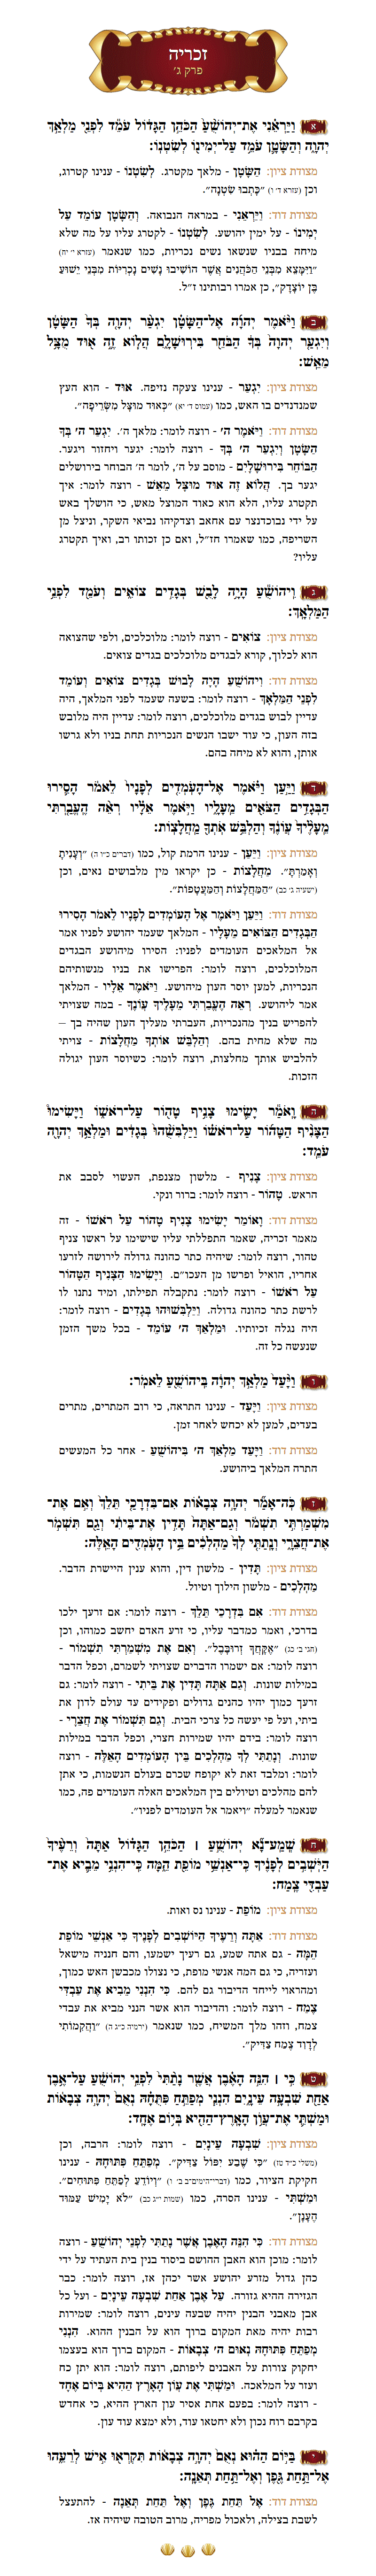 Sefer Zechariah Chapter 3 with commentary